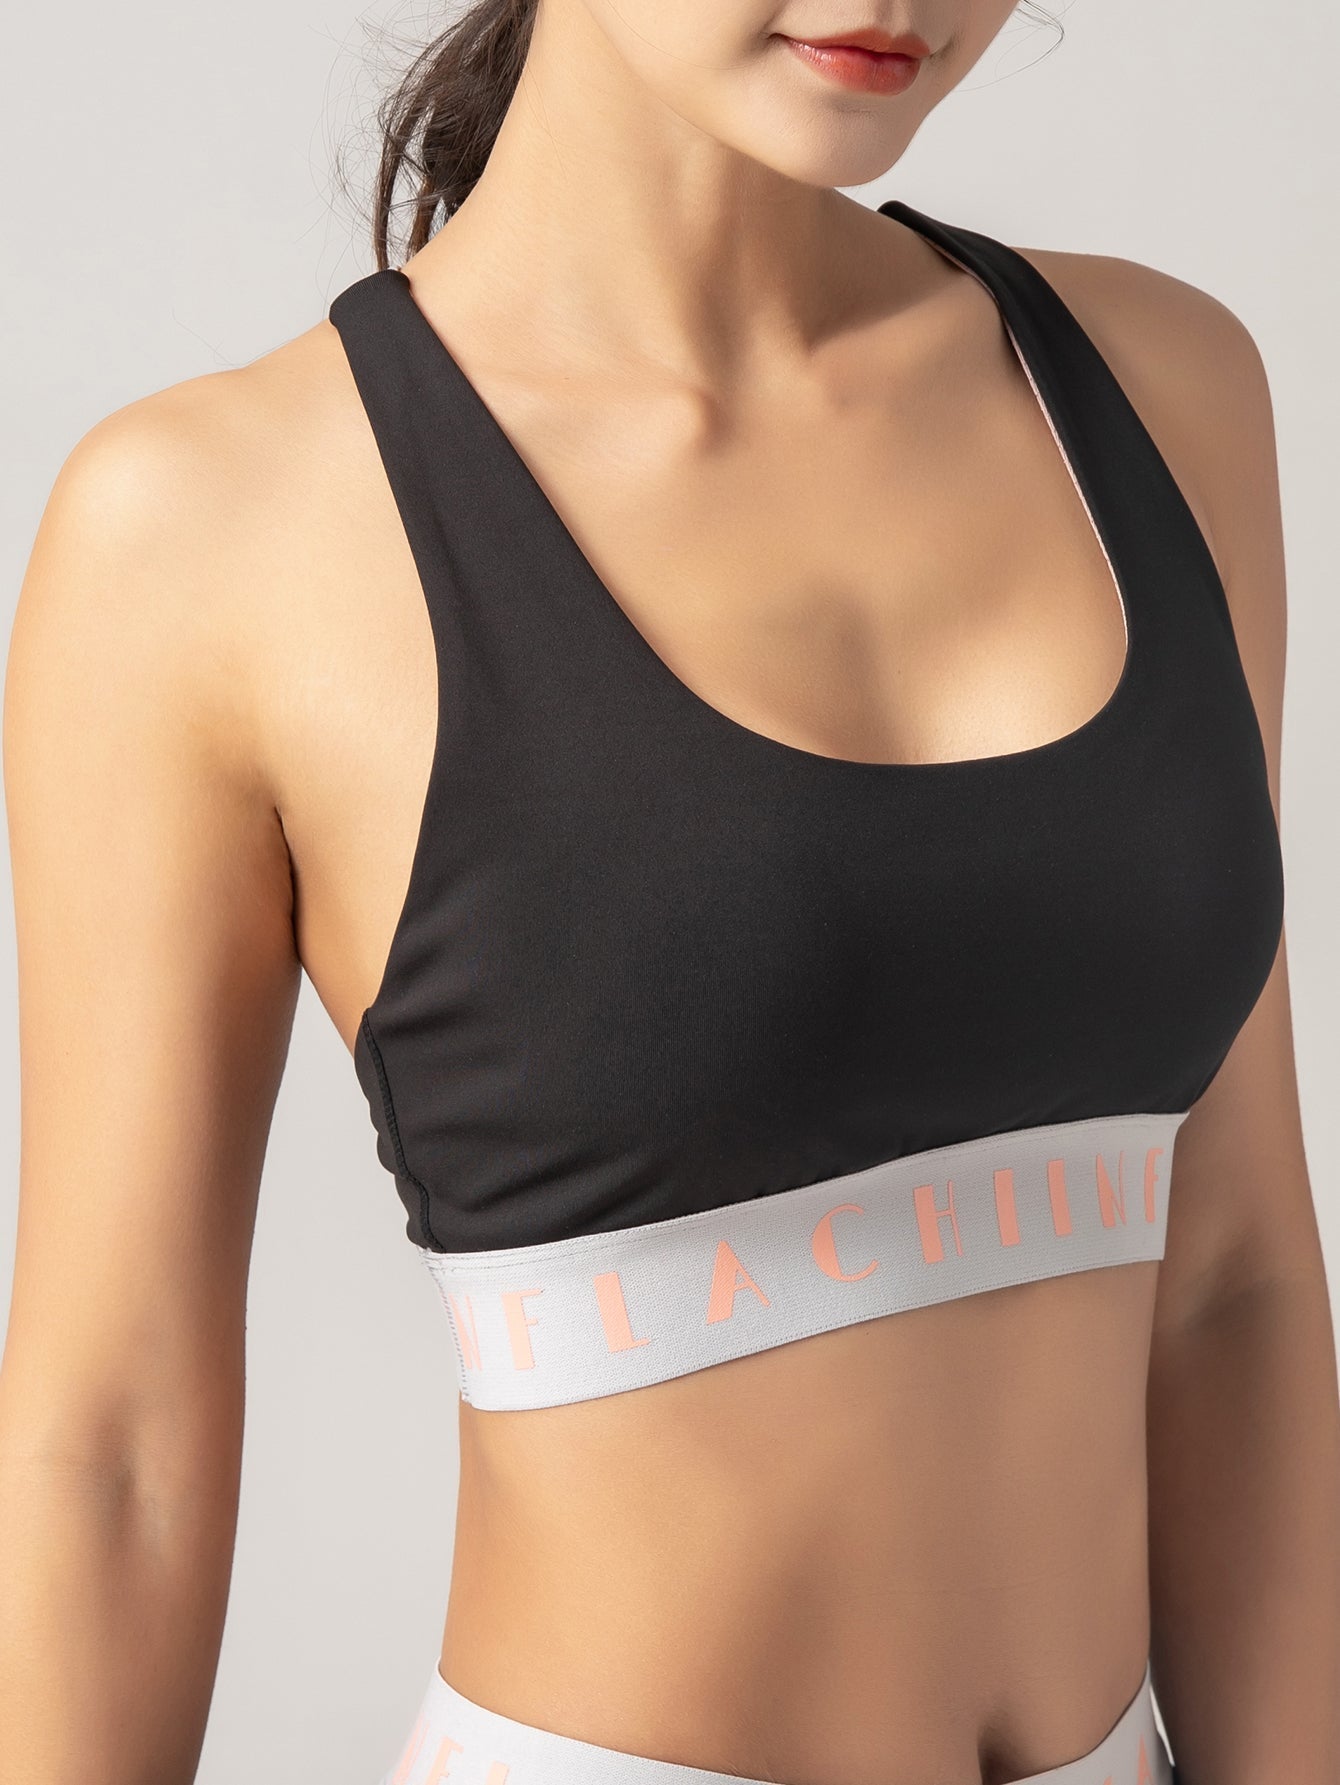  Padded Strappy Sports Bras for Women, Criss Cross Back